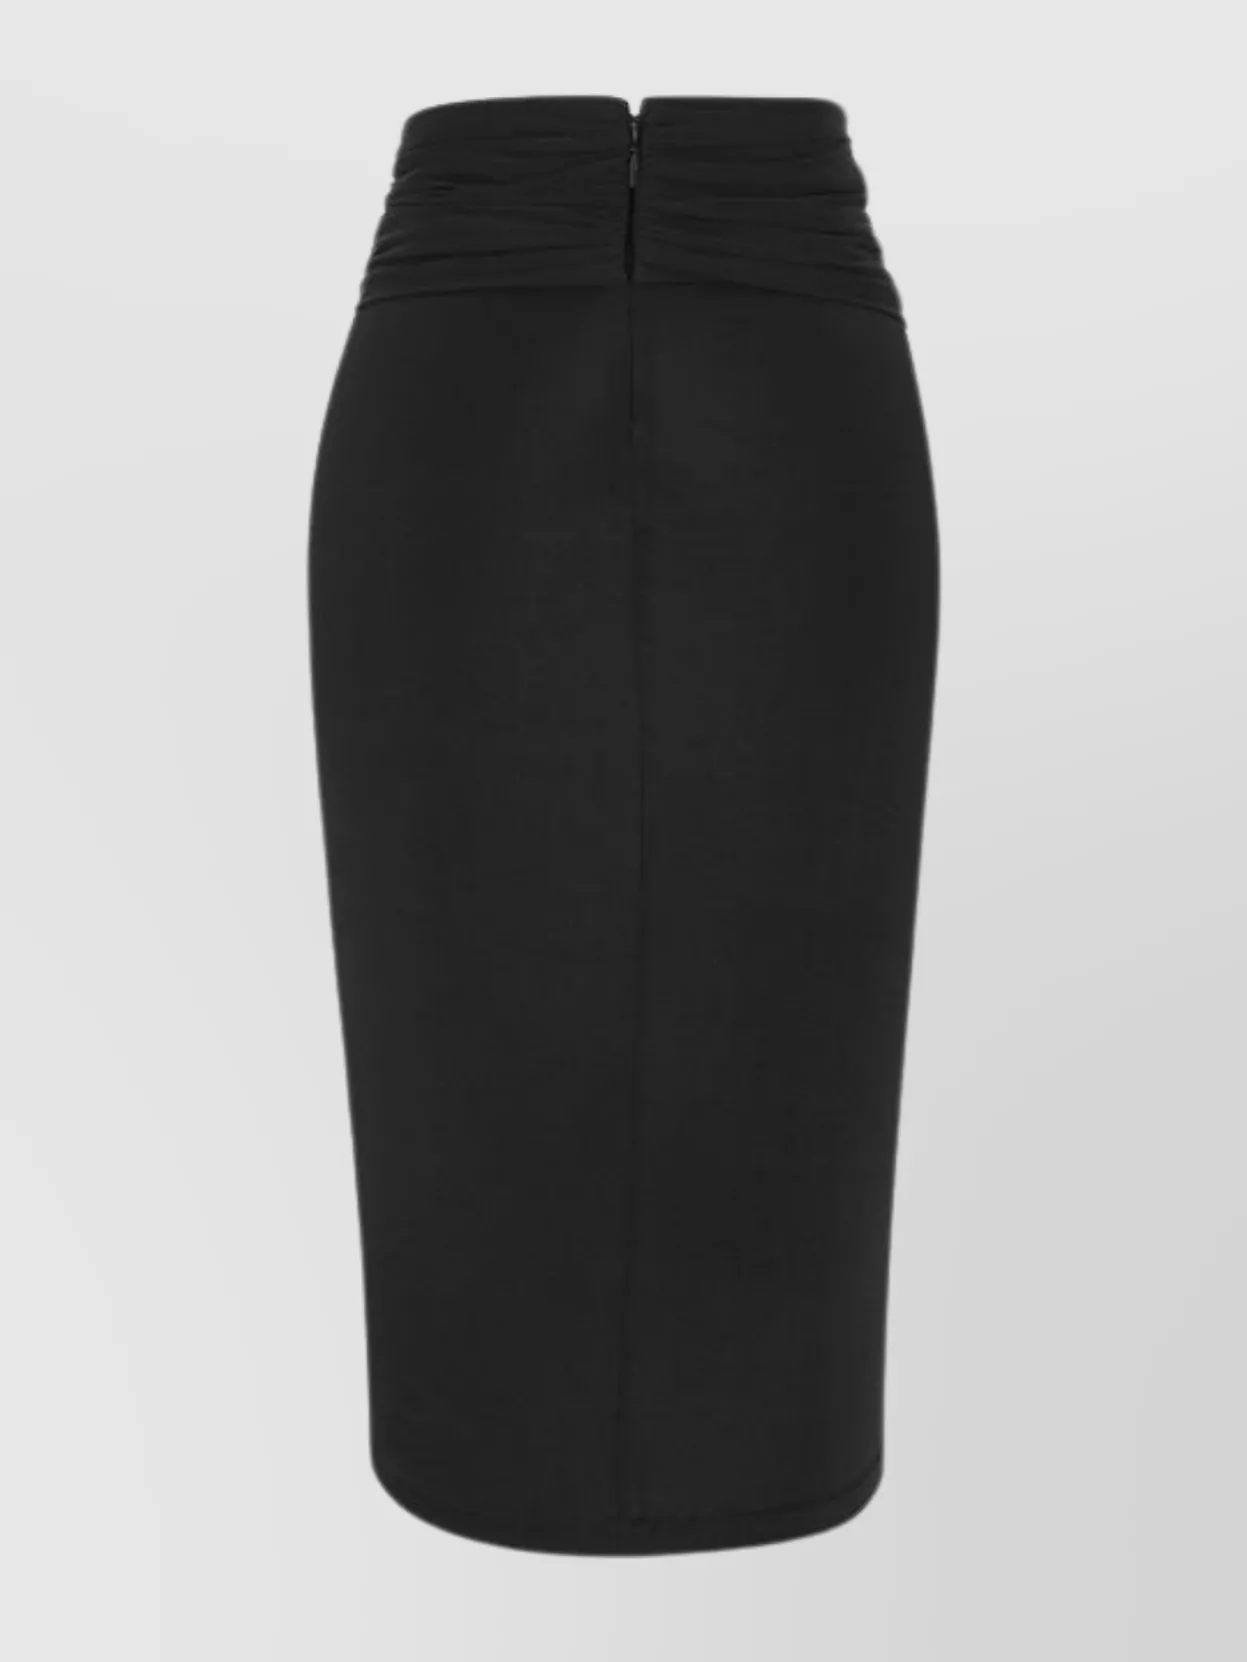 Saint Laurent Draped Pencil Skirt Featuring Ruched Detailing In Black